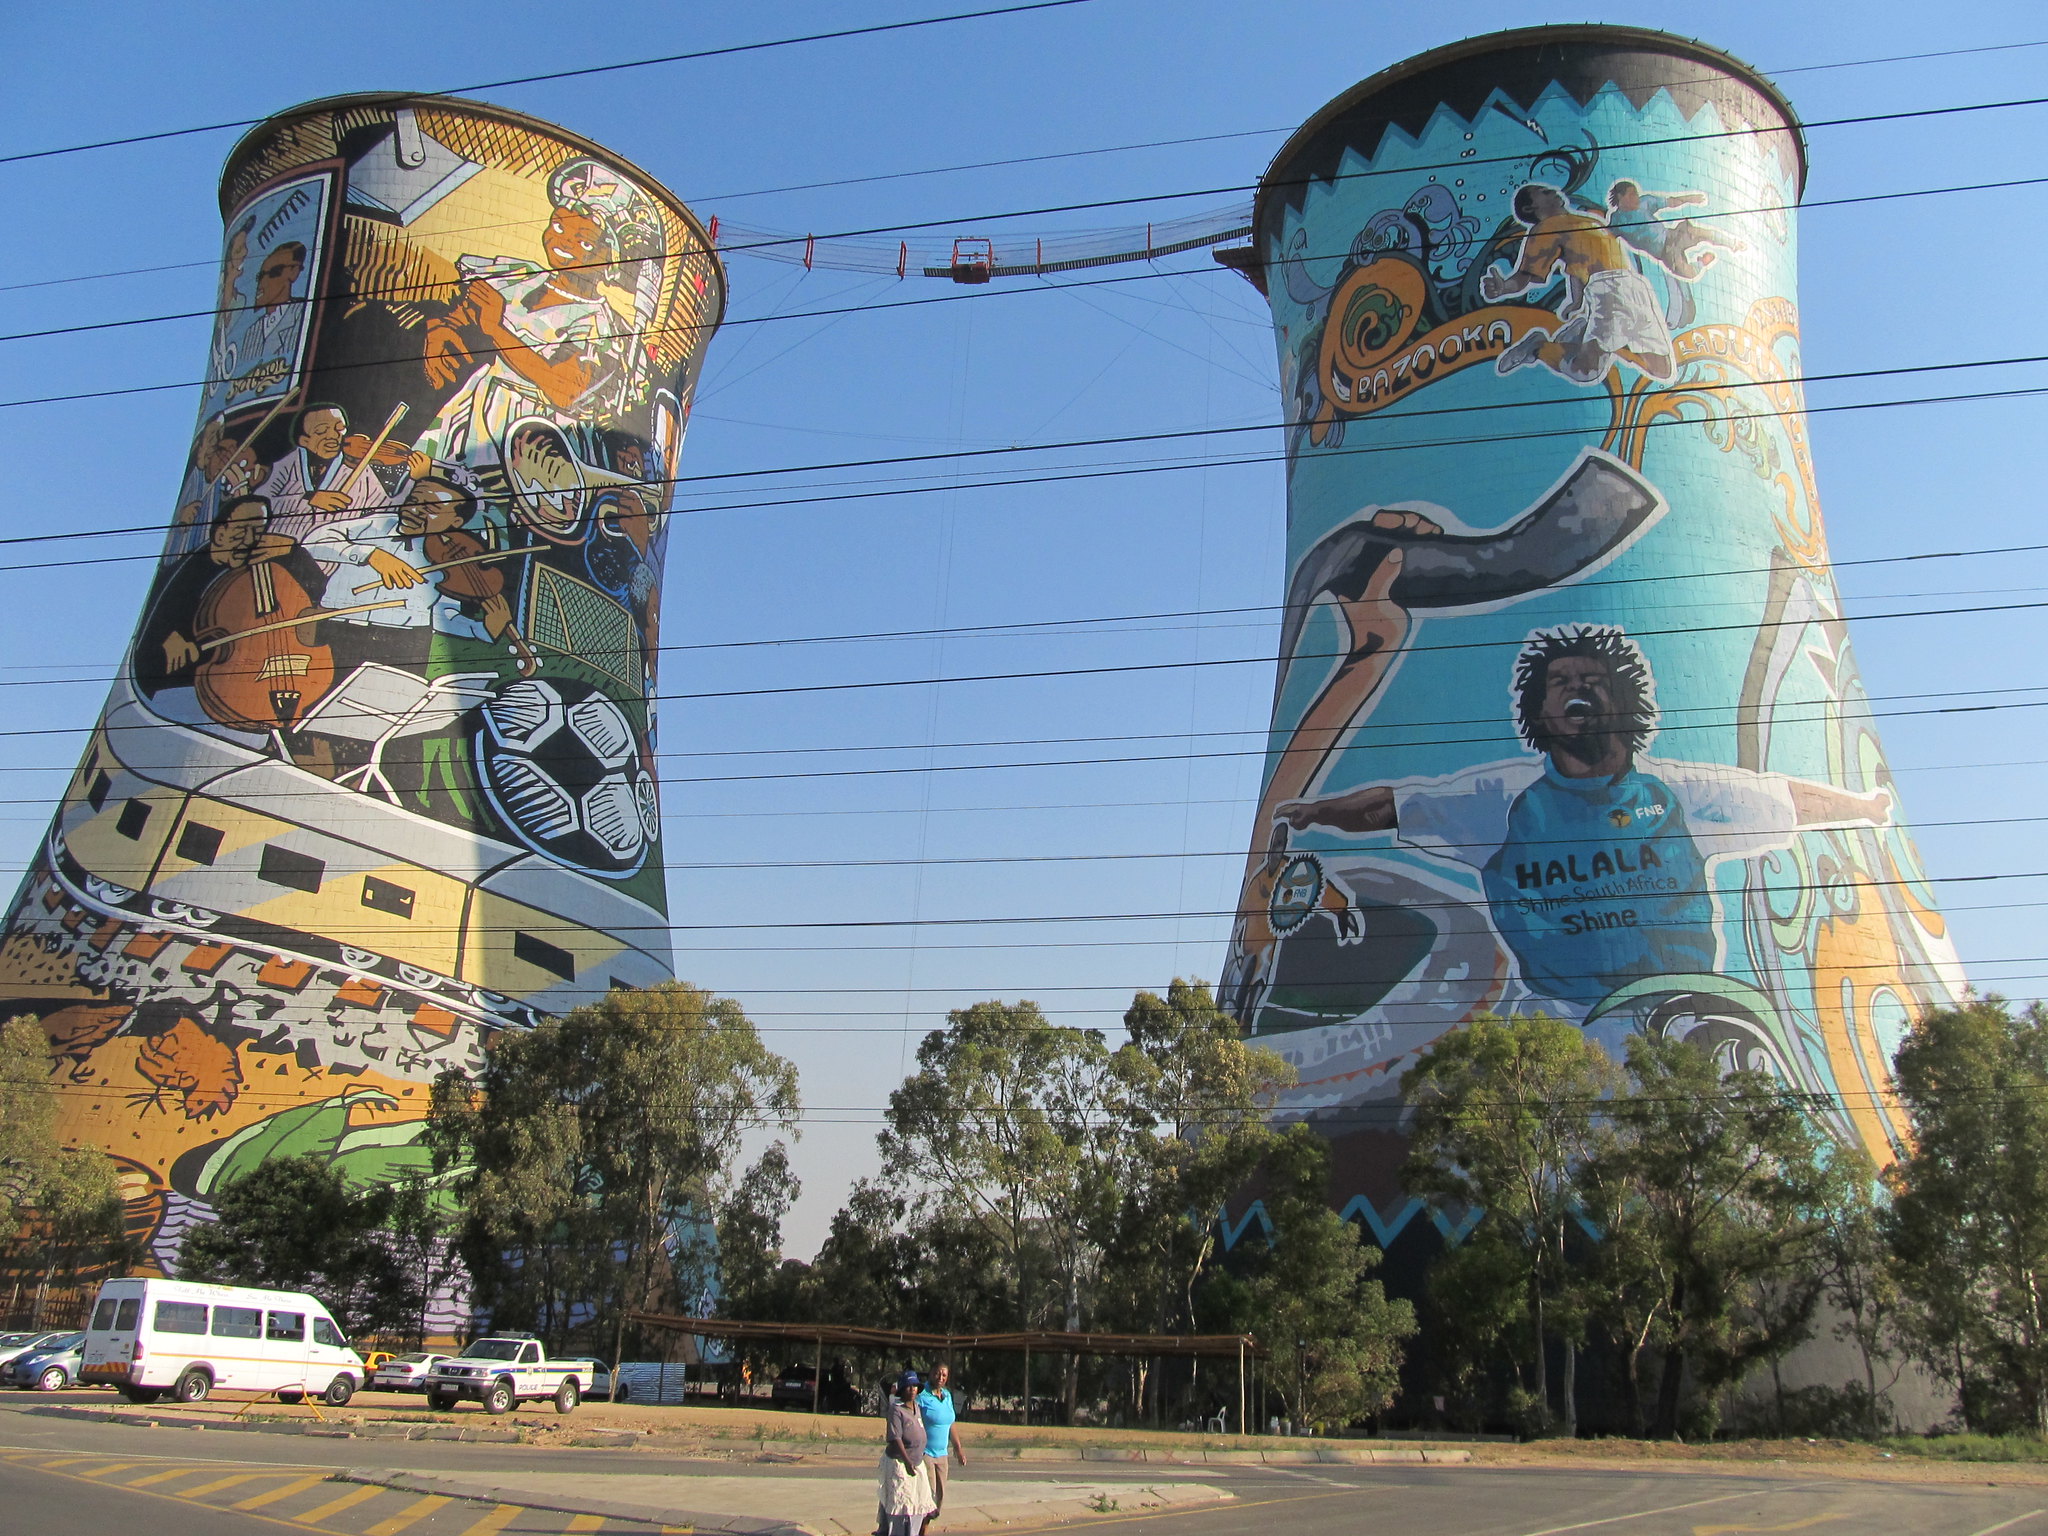 Cooling towers at a long-closed coal fired electric plant. Now utilised as a recreation area in Soweto, South Africa.